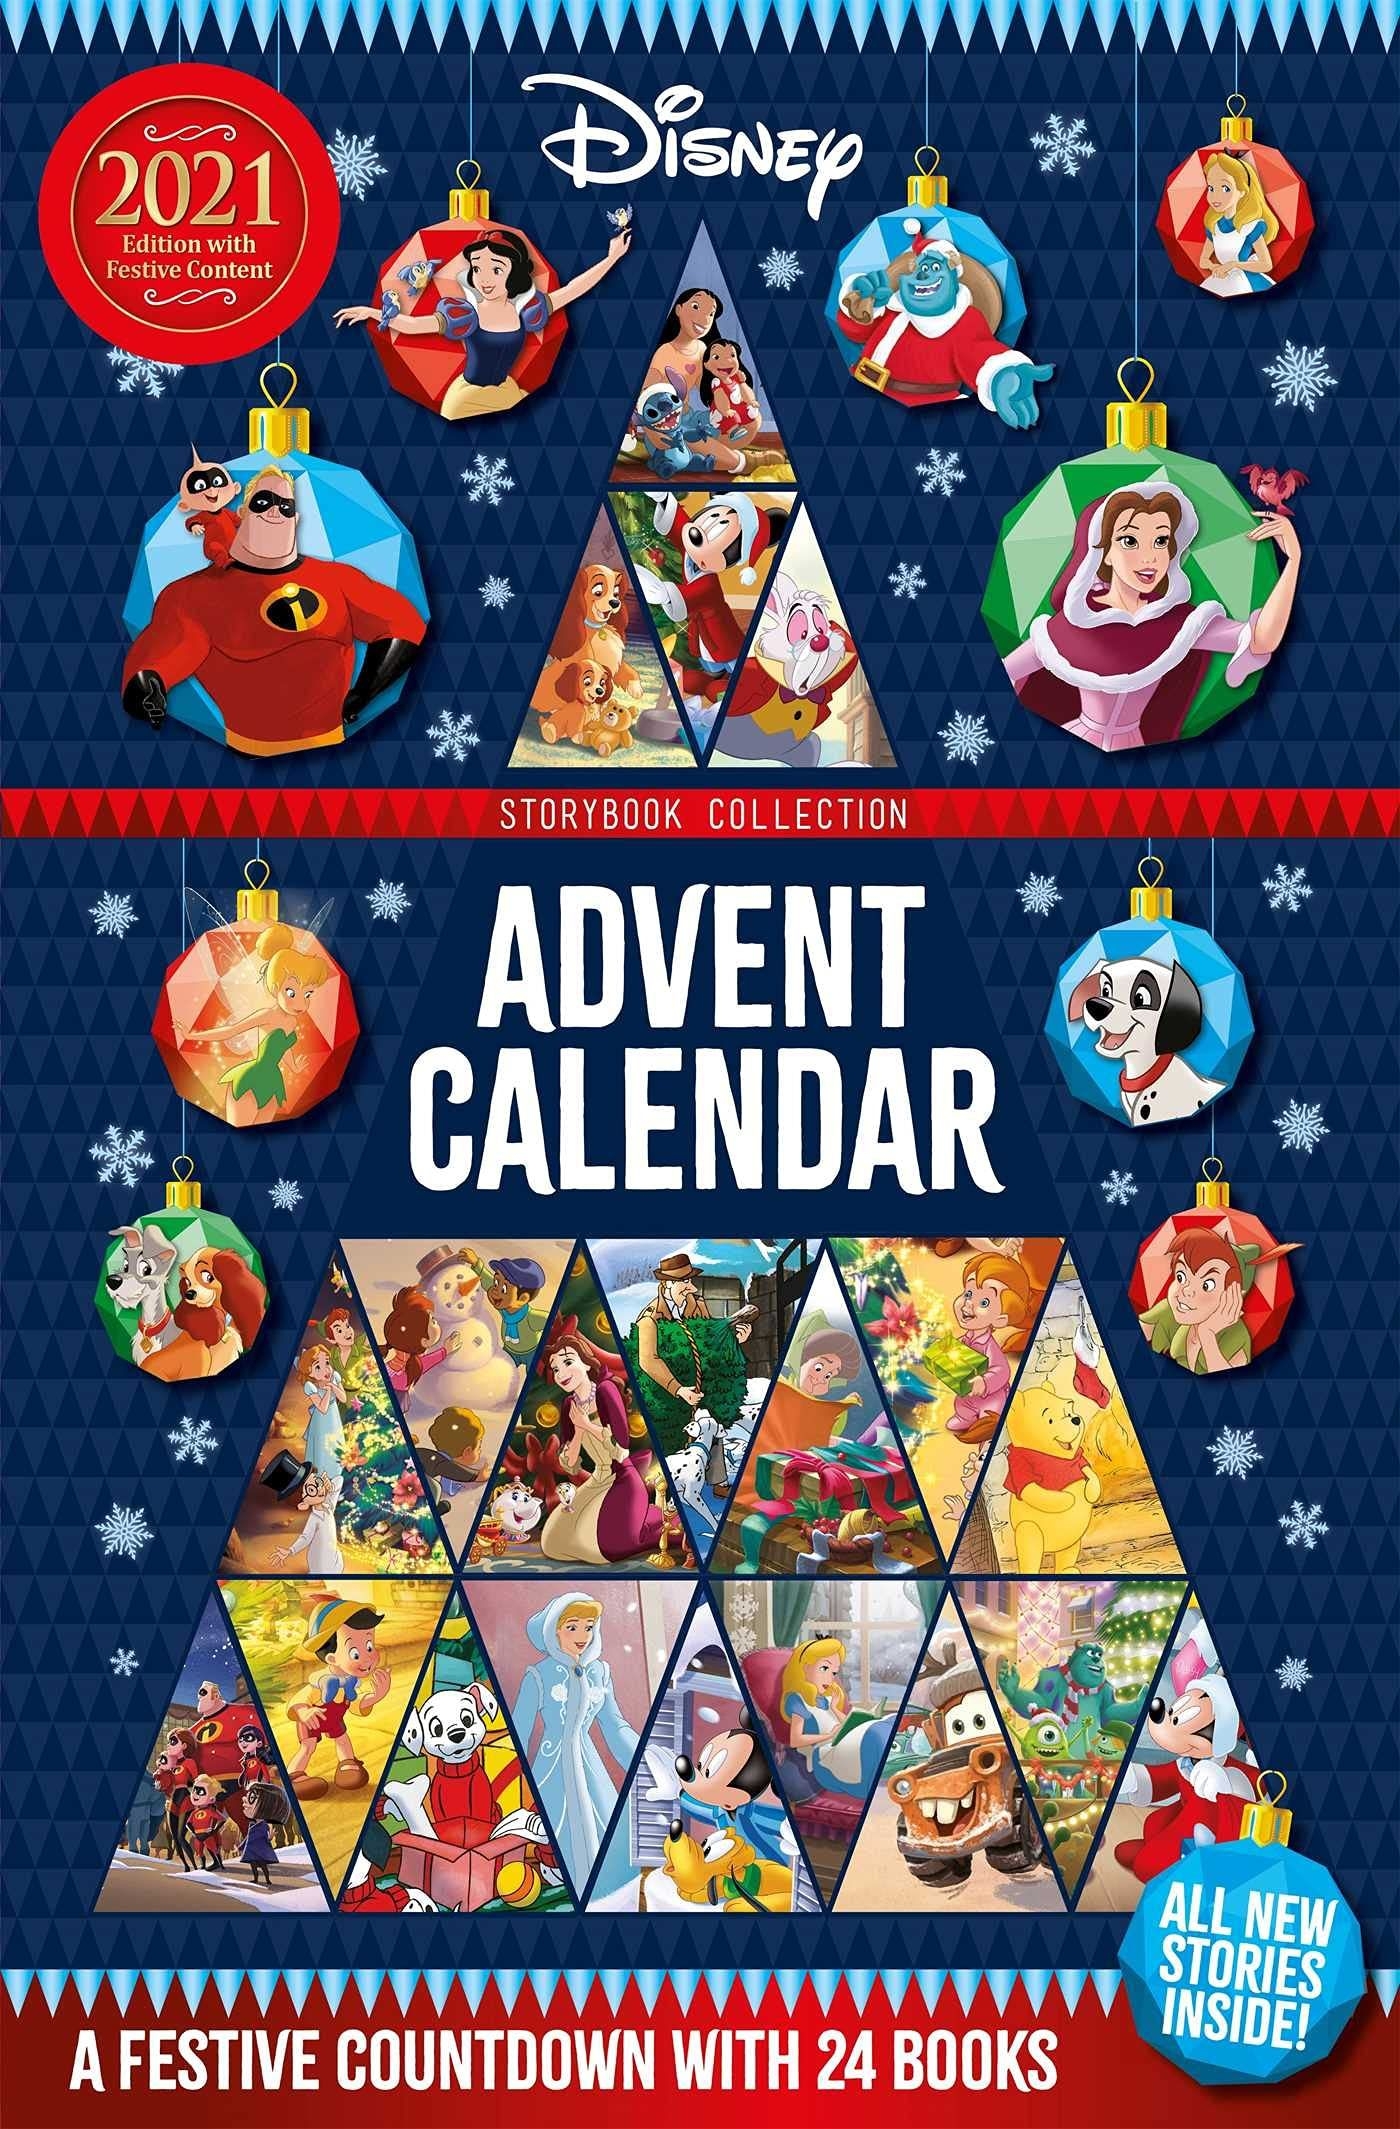 Disney: Storybook Collection Advent Calendar 2021 Only